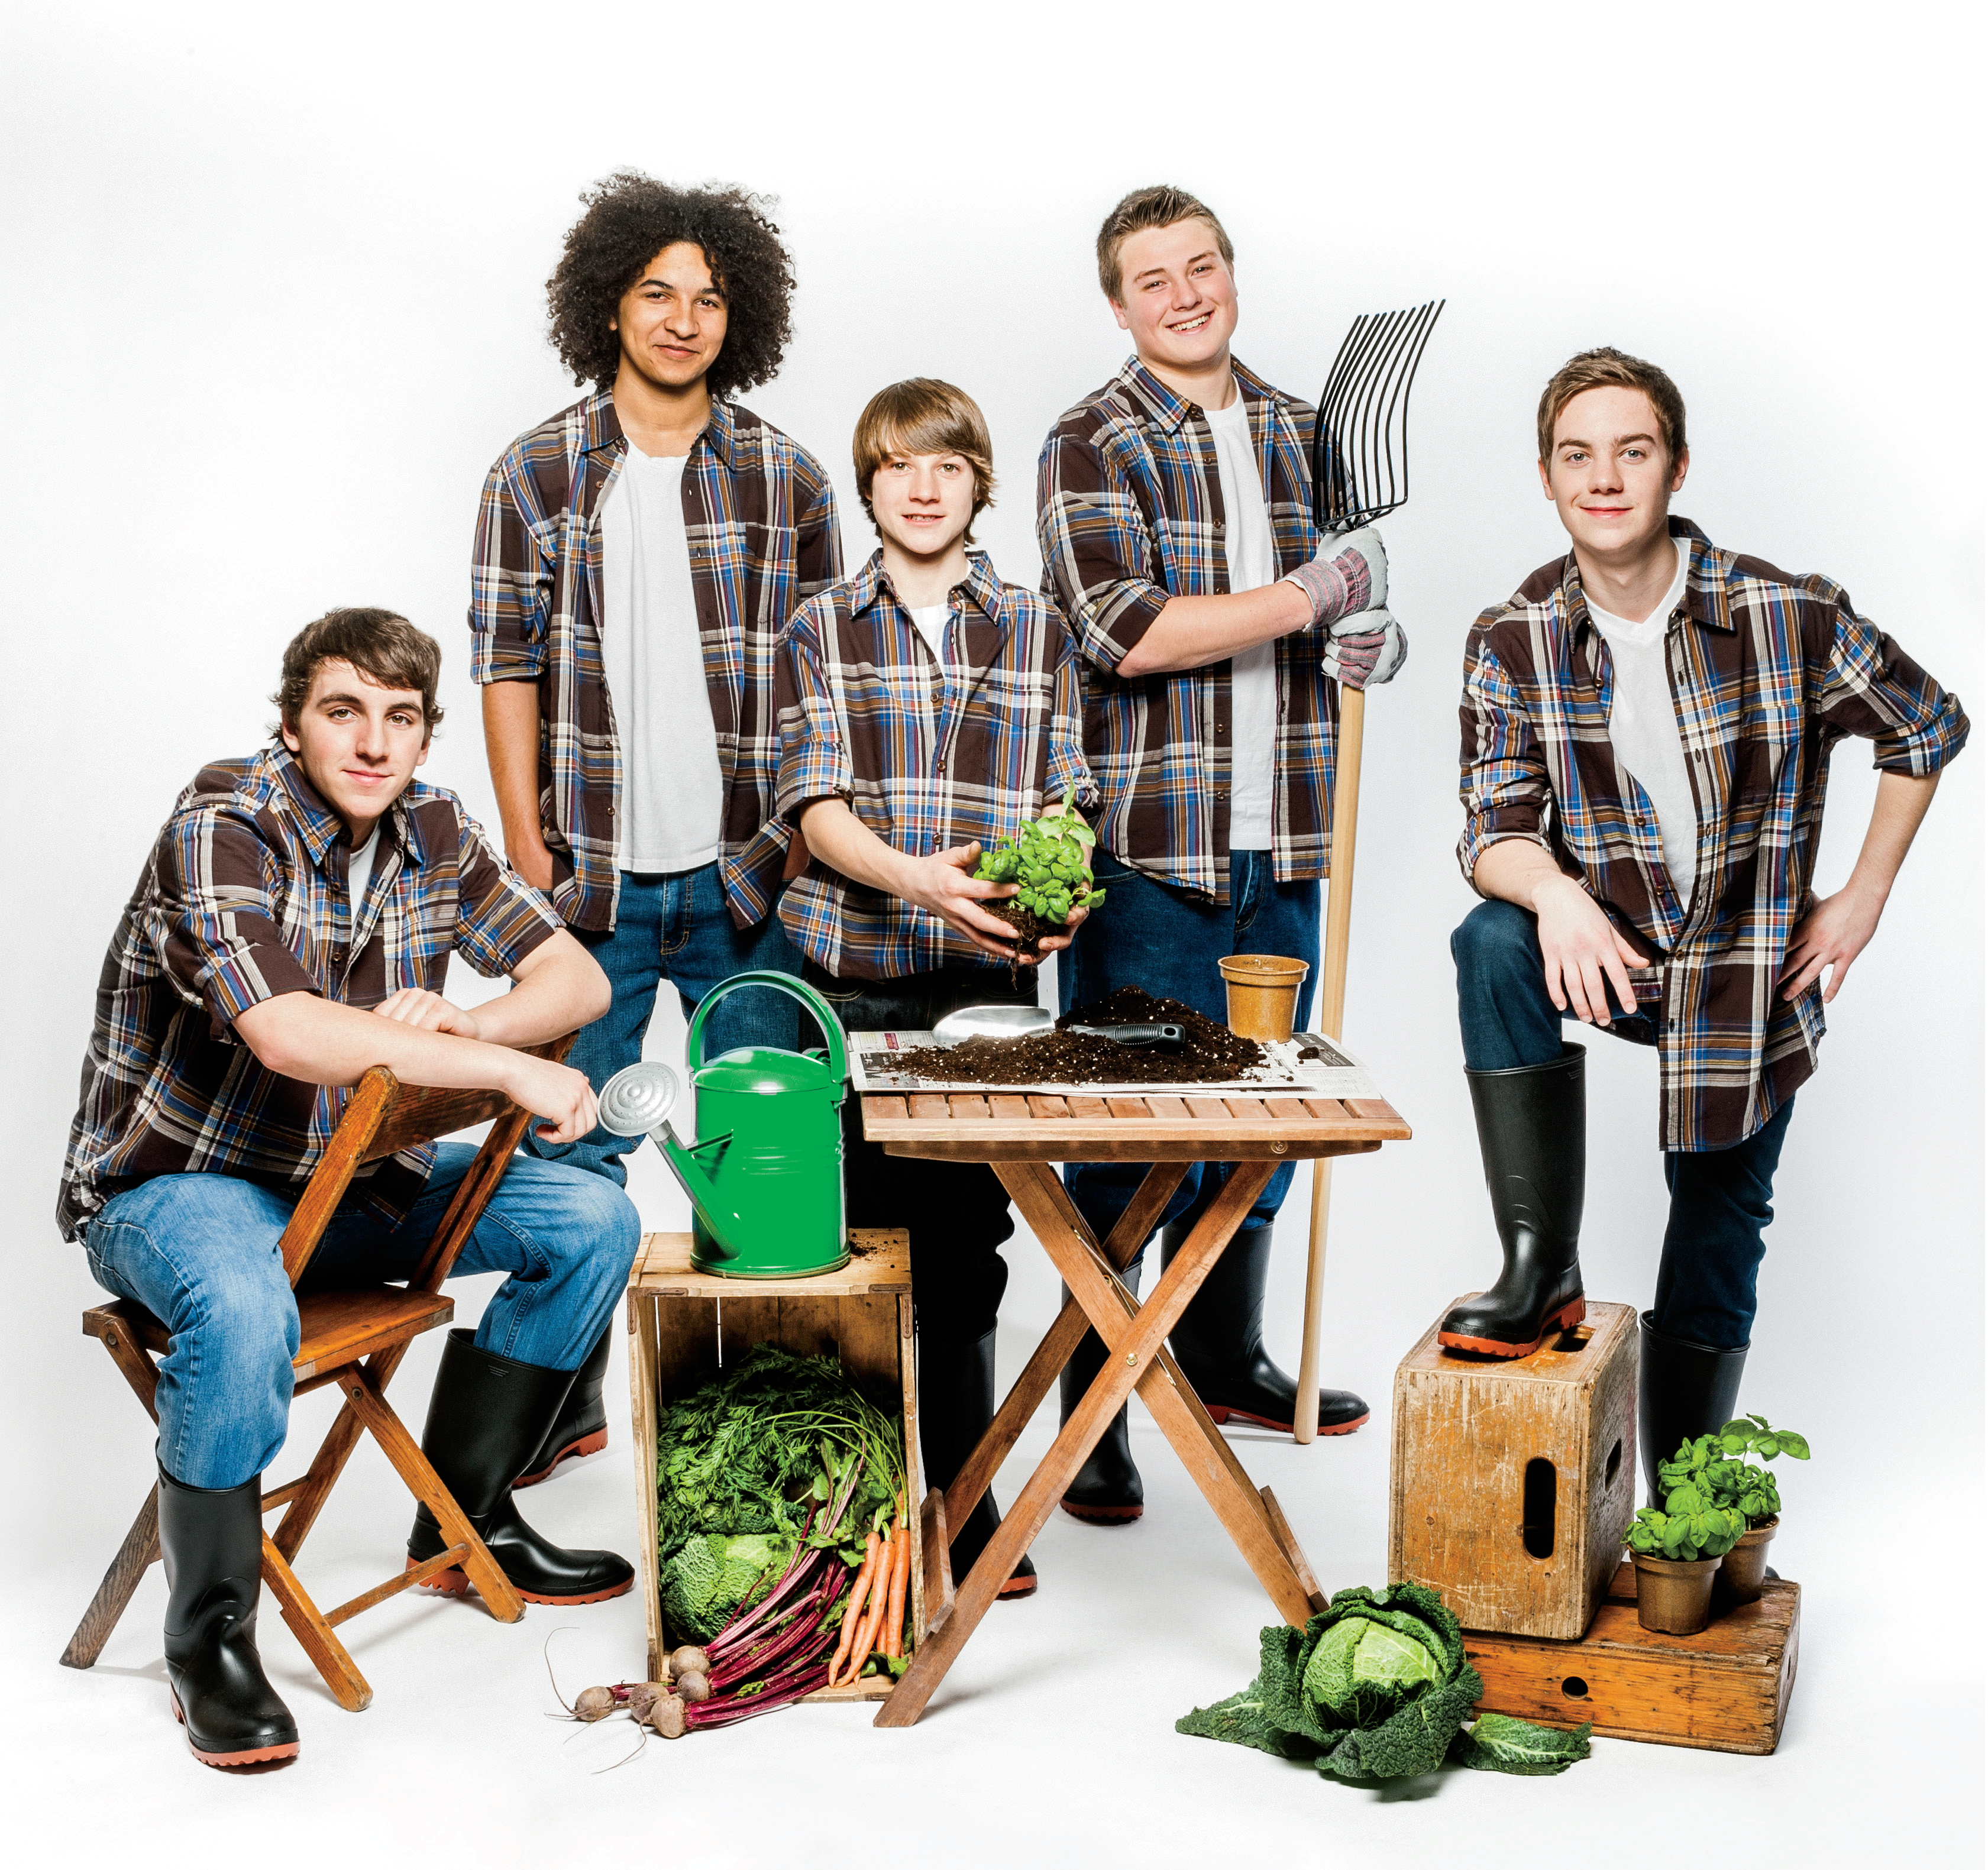 Five teenaged students holding various gardening equipment and vegetables.